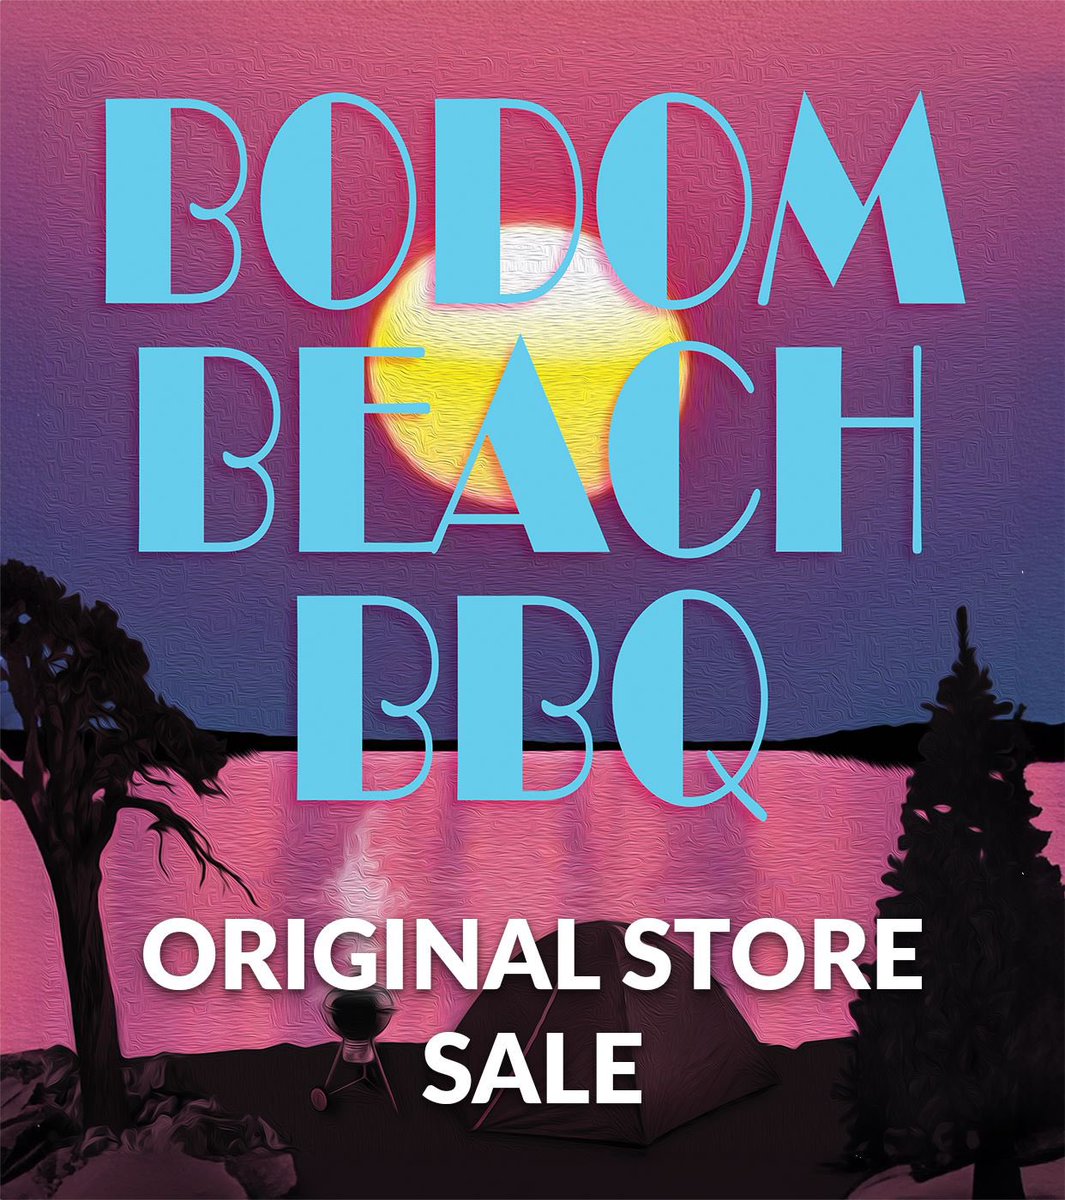 Time for Bodom Beach BBQ Sale! 🌅 We have a discount ladder system in our store on selected items until 17th of June. Tag along with 5-10 your Hate crew friends and create an order together to receive the maximum -50% discount. store.cobhc.com